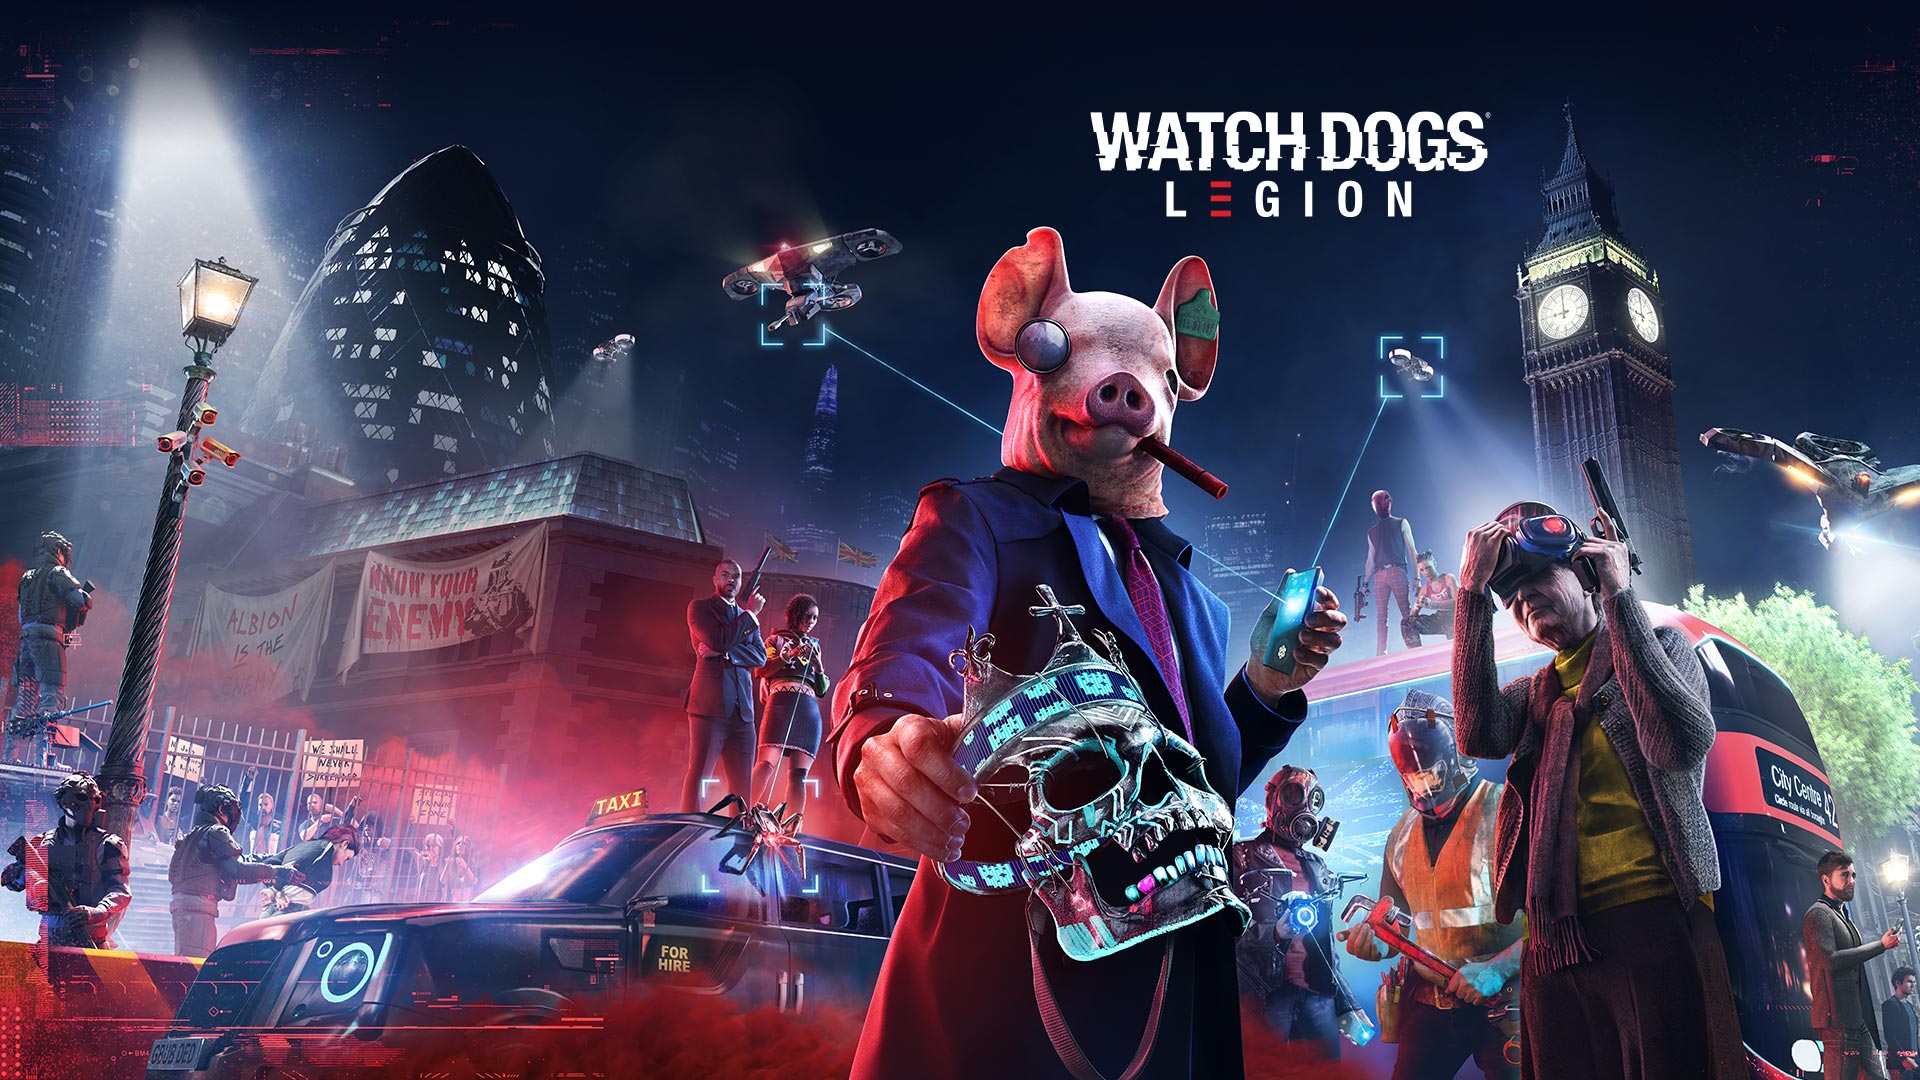 Watch Dogs: Legion 60 FPS comes to PS5 and Xbox Series X on June 1